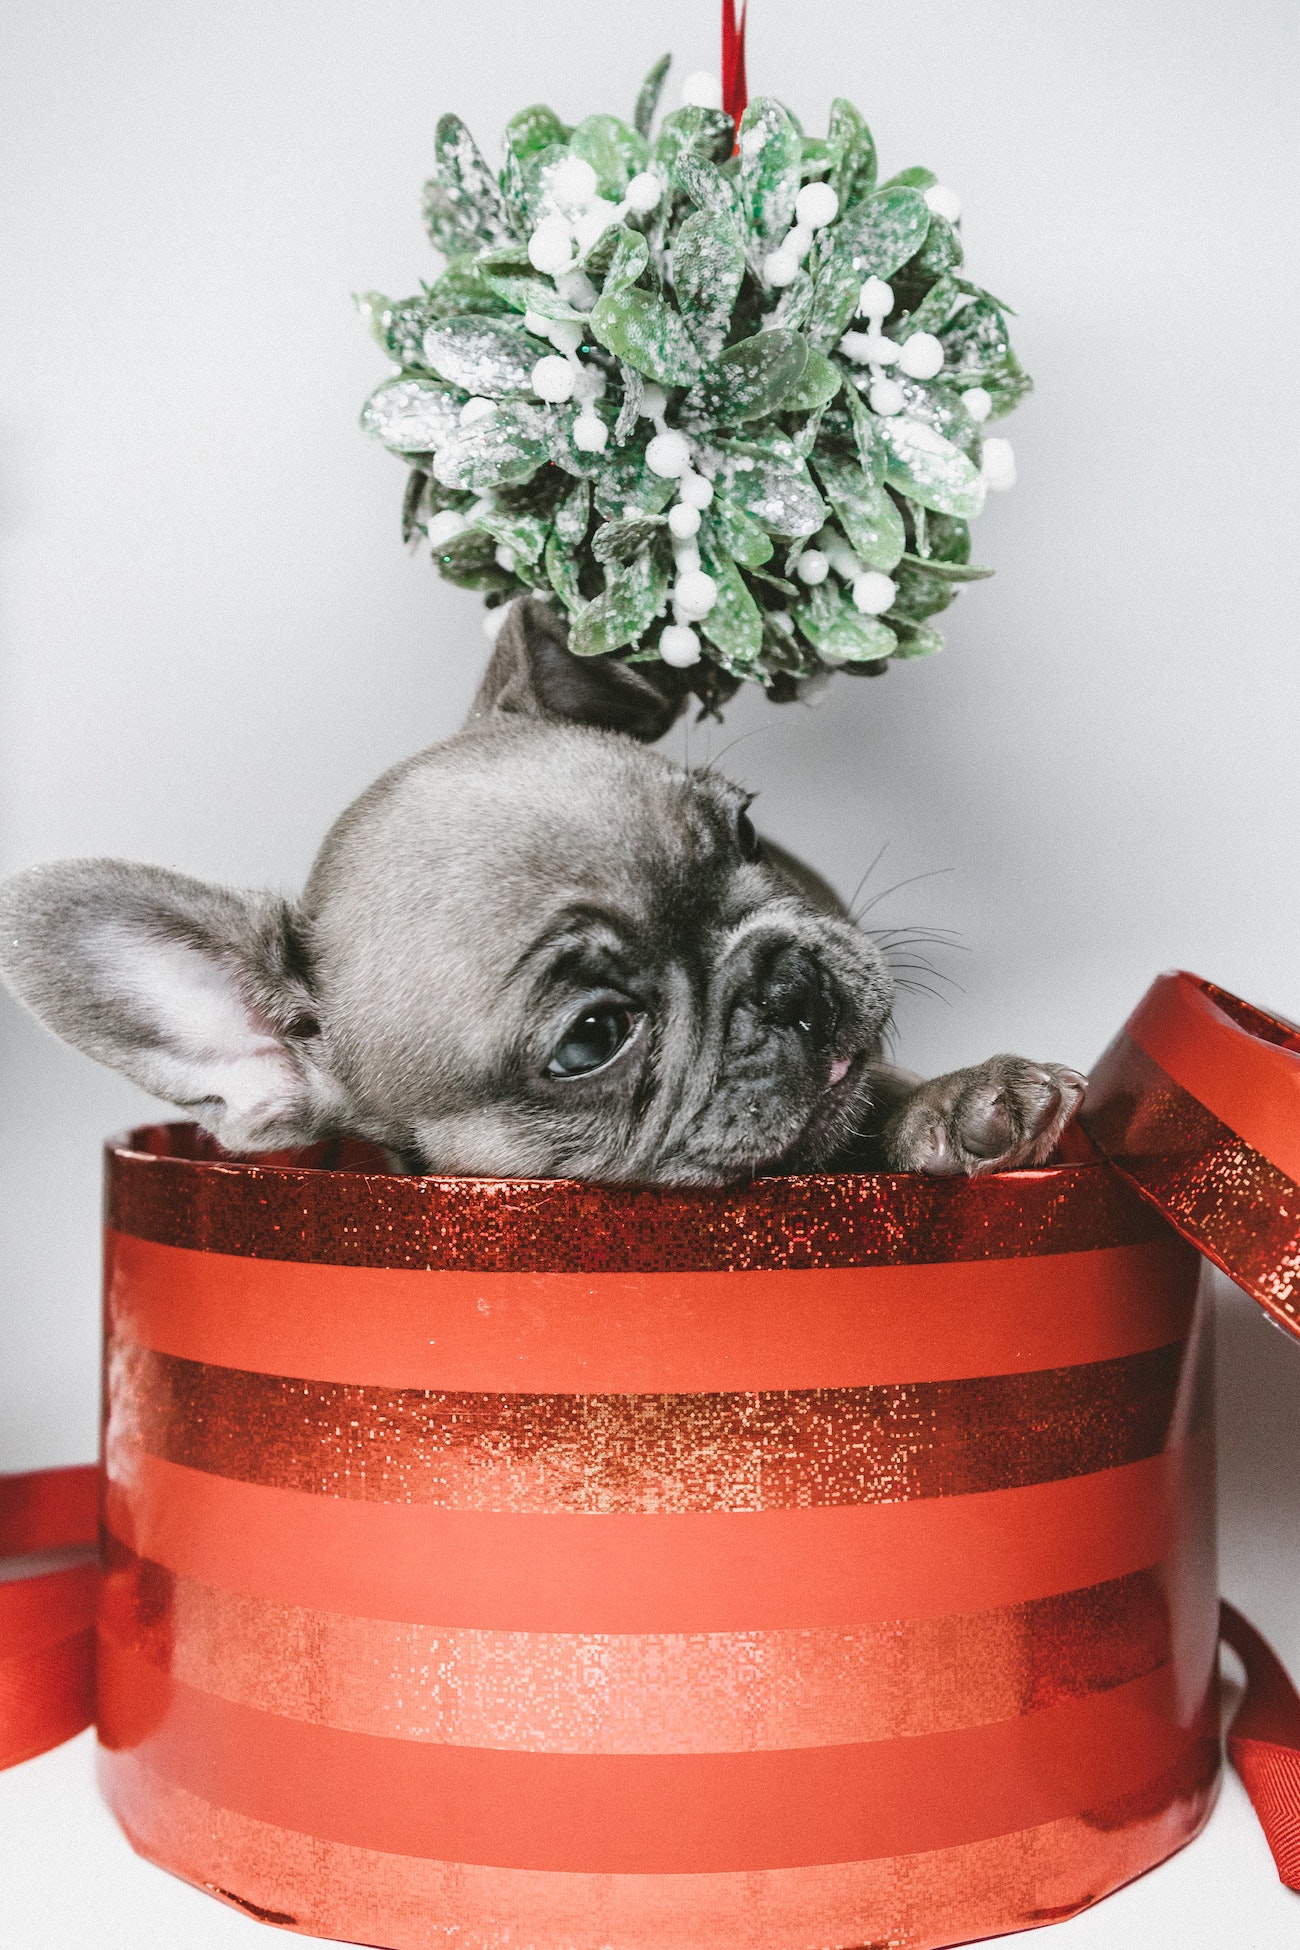 Gifting a pet? Watch out for puppy scams this holiday season